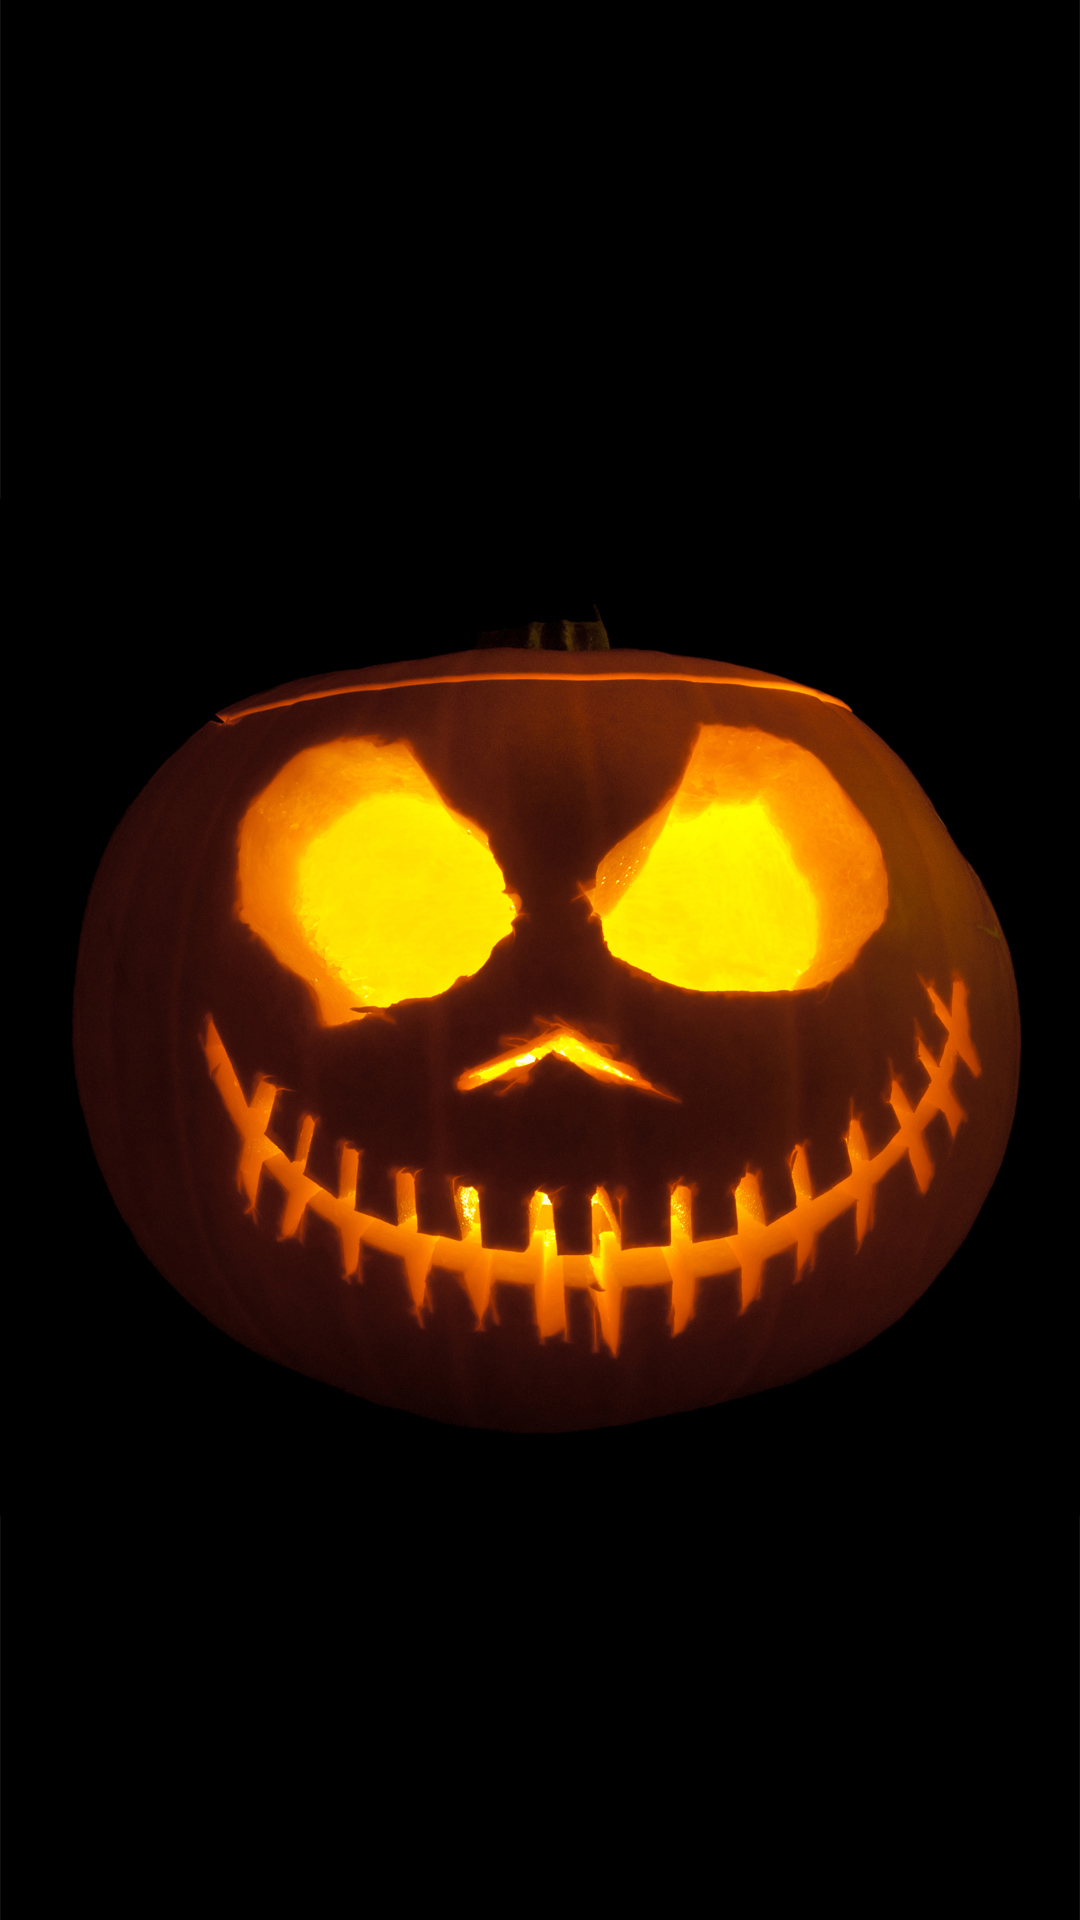 Scary Pumpkin Halloween Best Htc One Wallpaper And Easy To